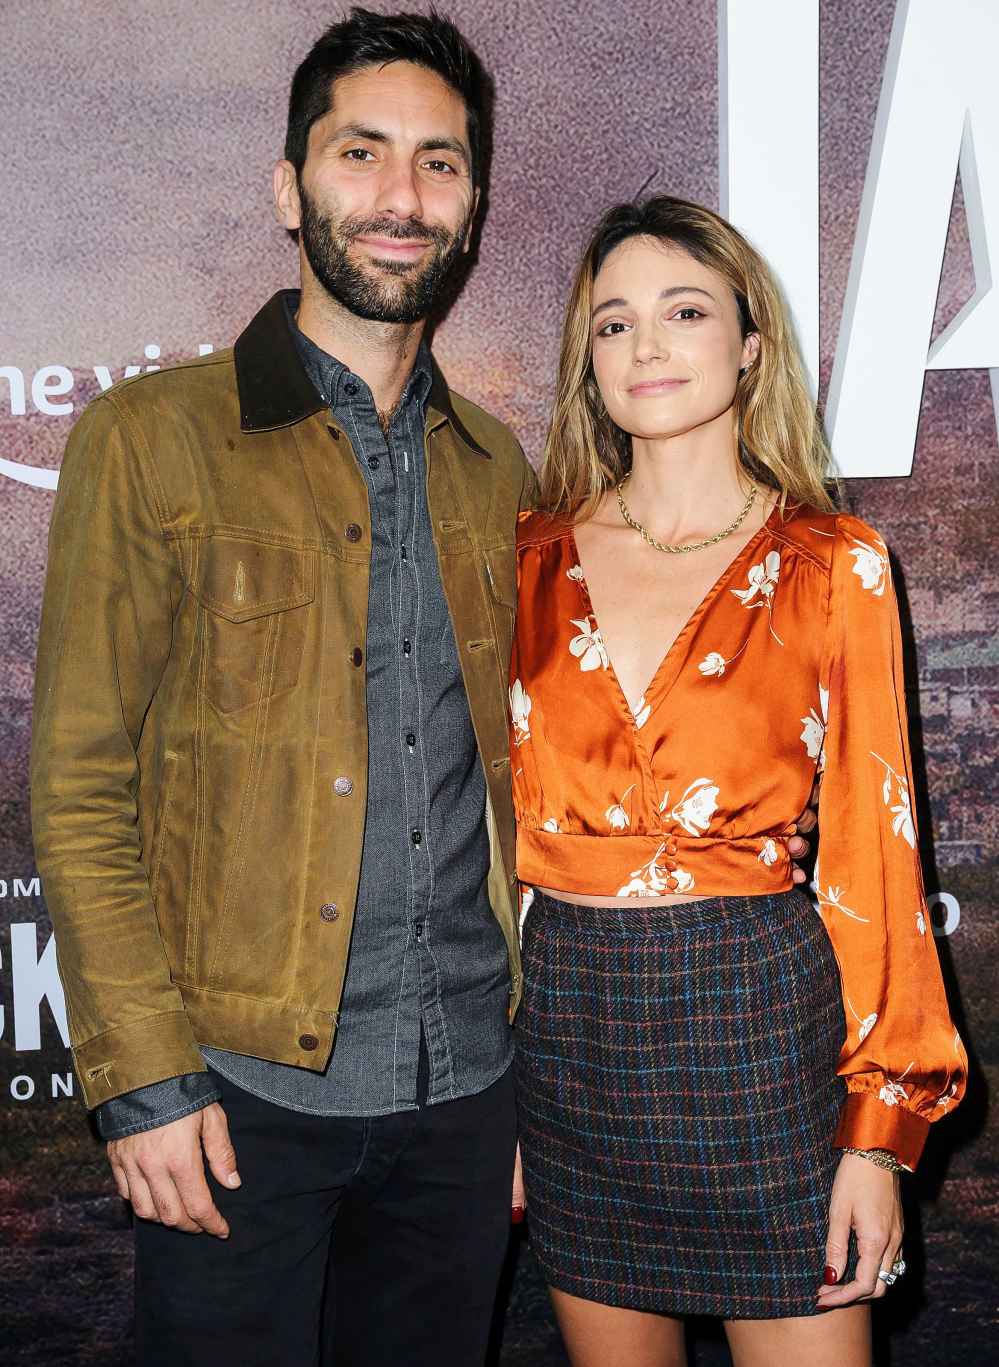 Nev Schulman Reveals How Many Kids He Wife Laura Perlongo Want to Have